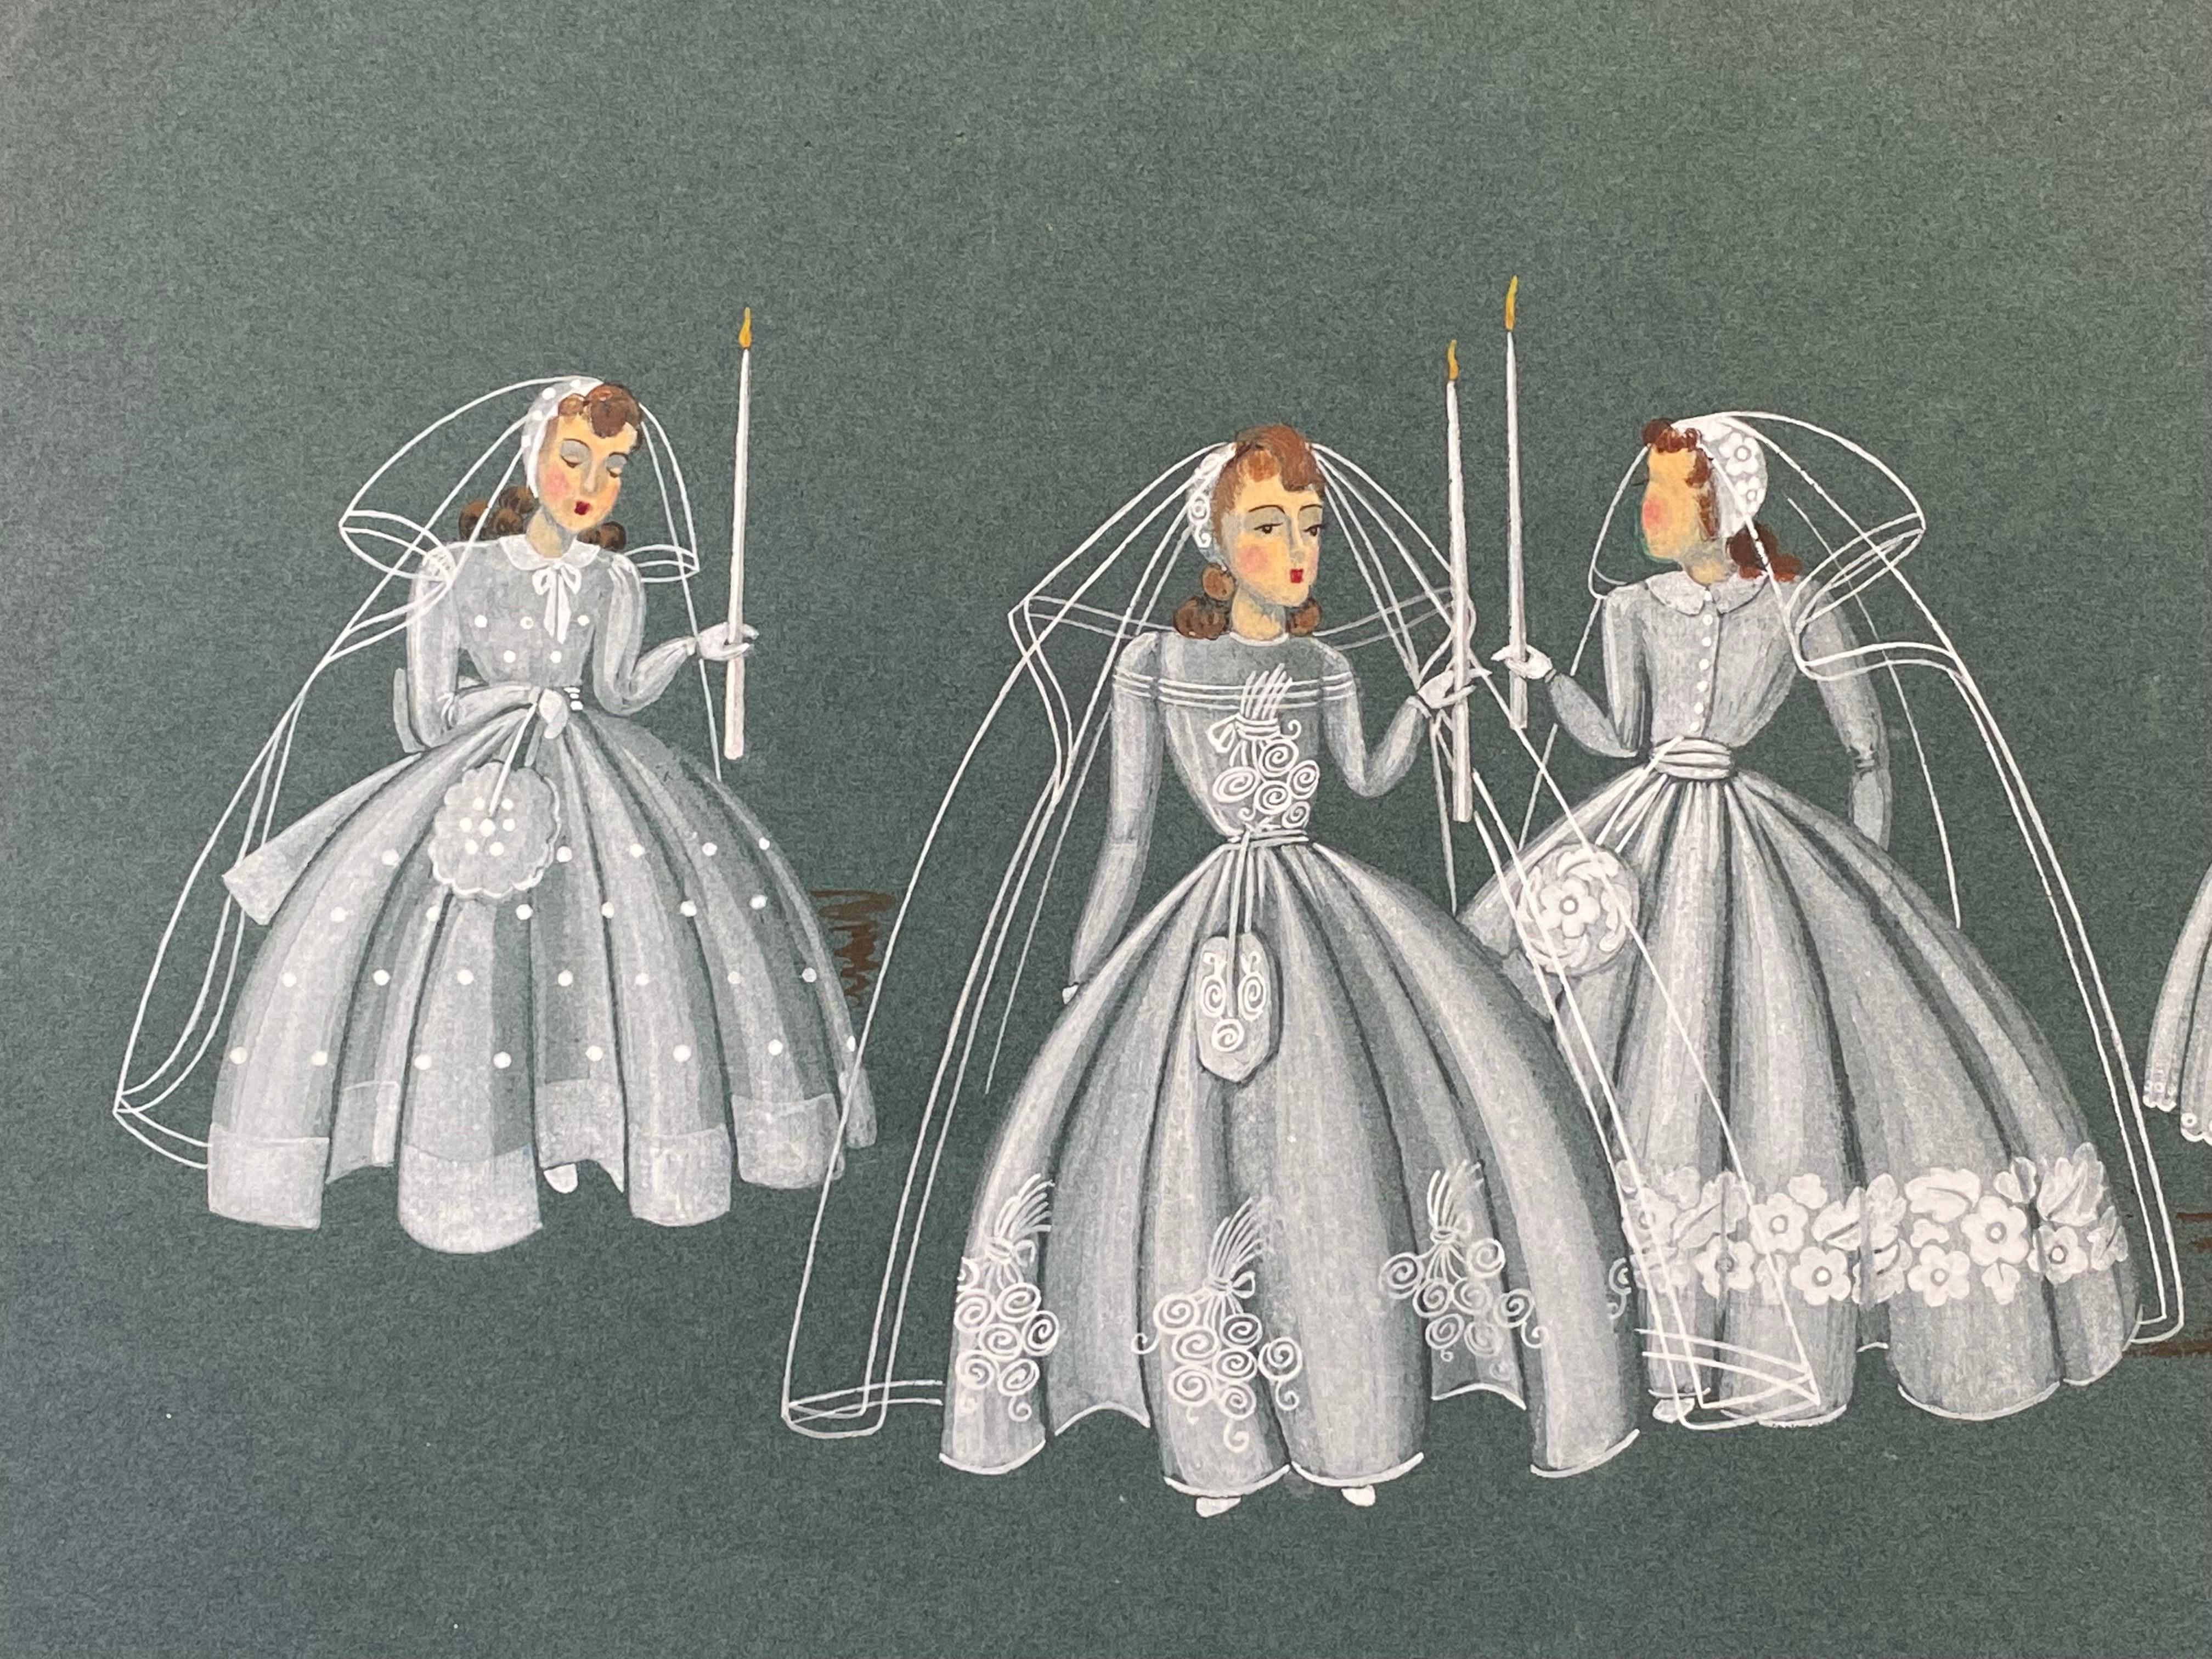 1940's Fashion Illustration - Four Brides Holding Candles - Painting by Geneviève Thomas